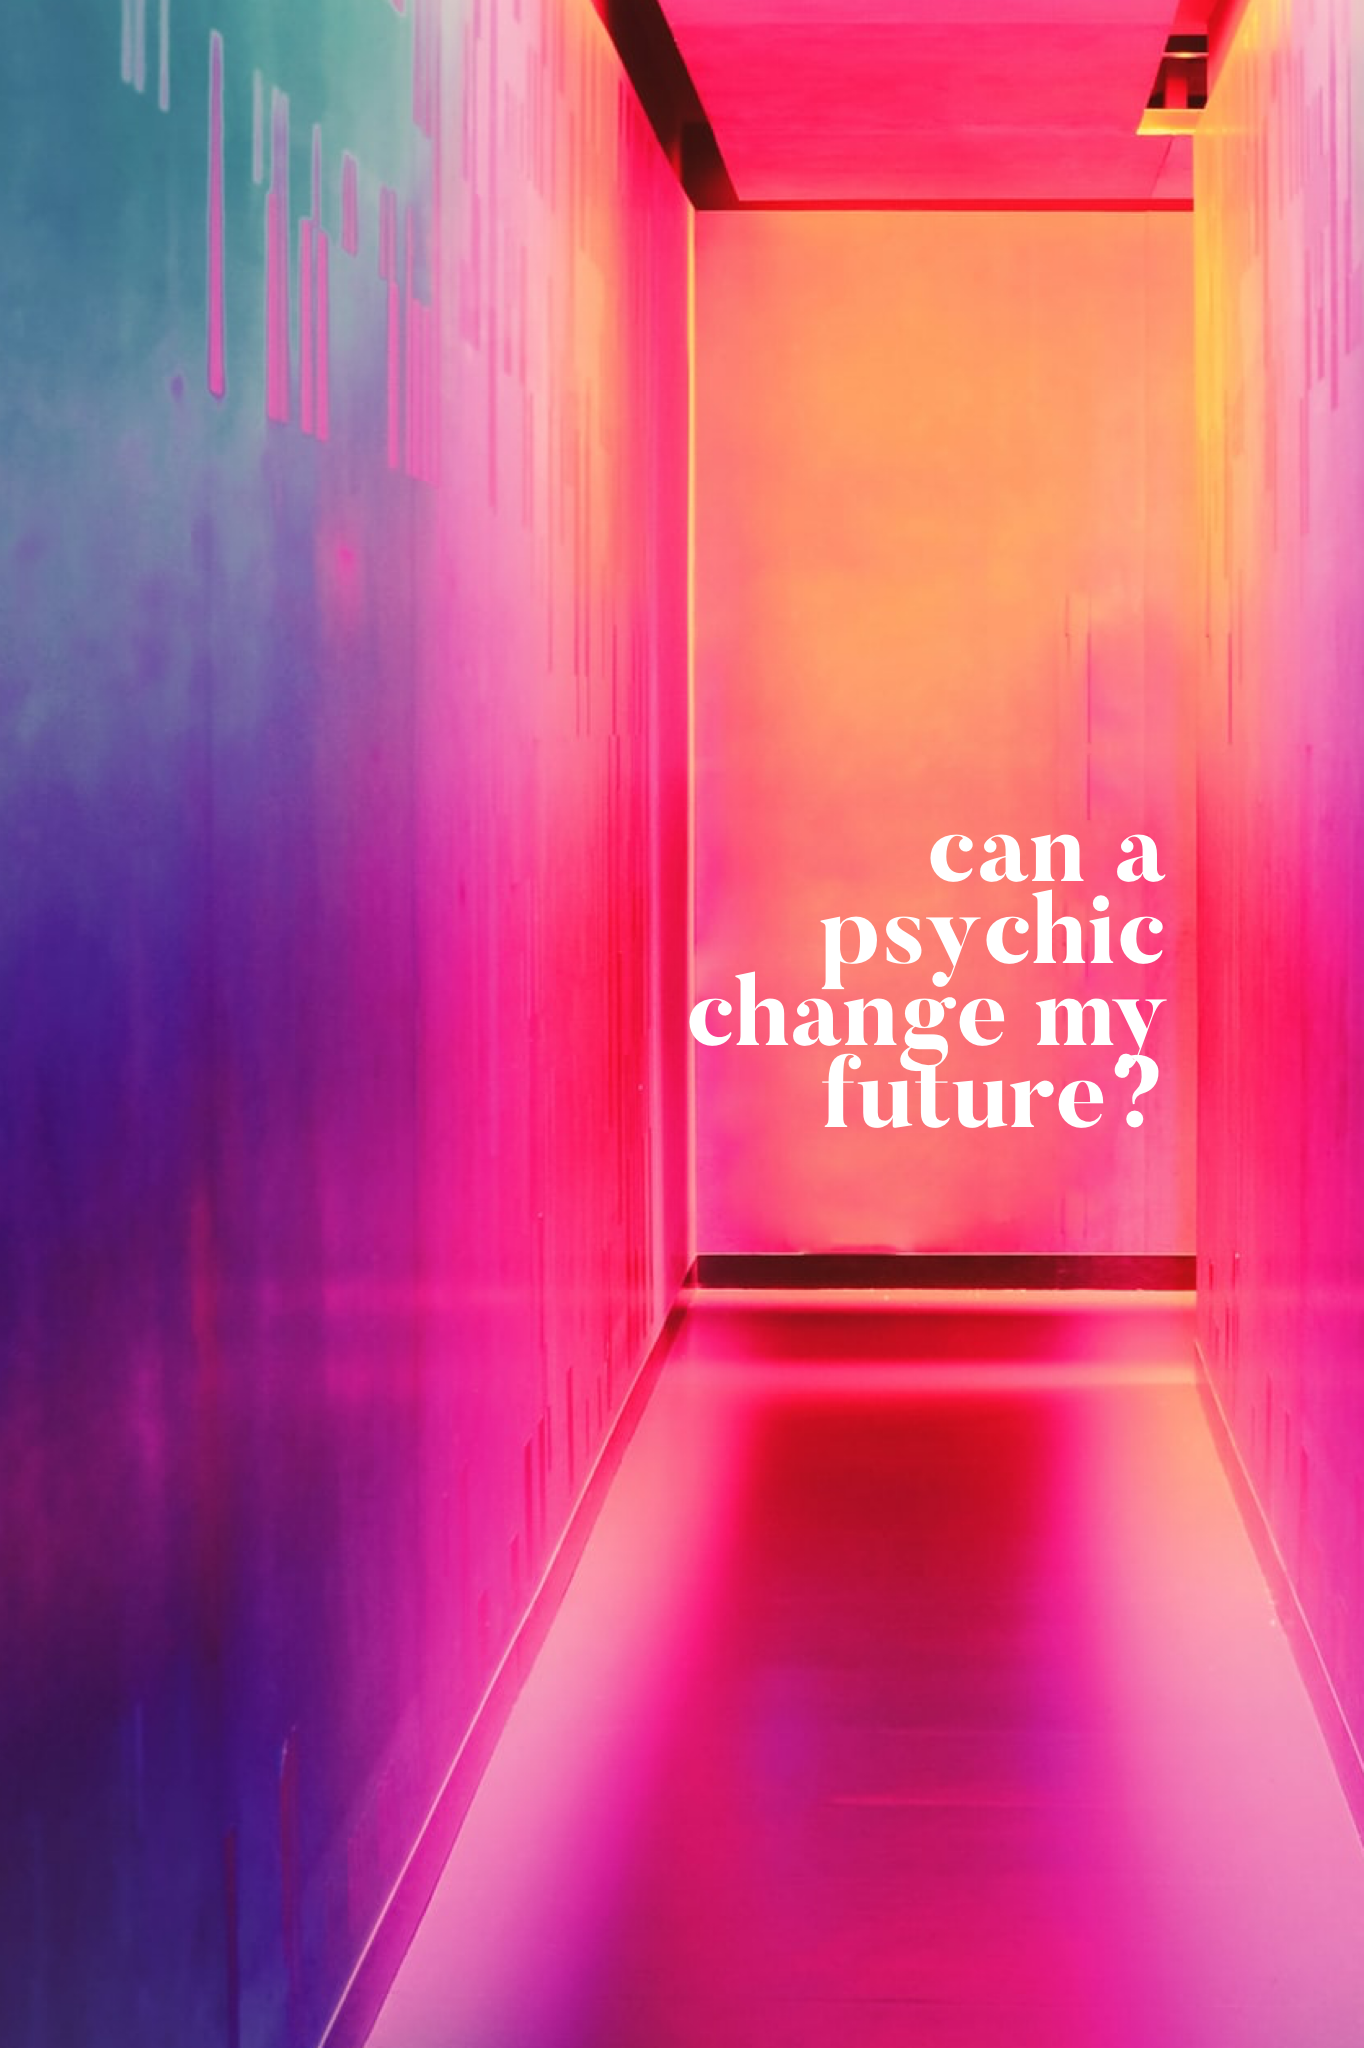 Can a psychic change my future?